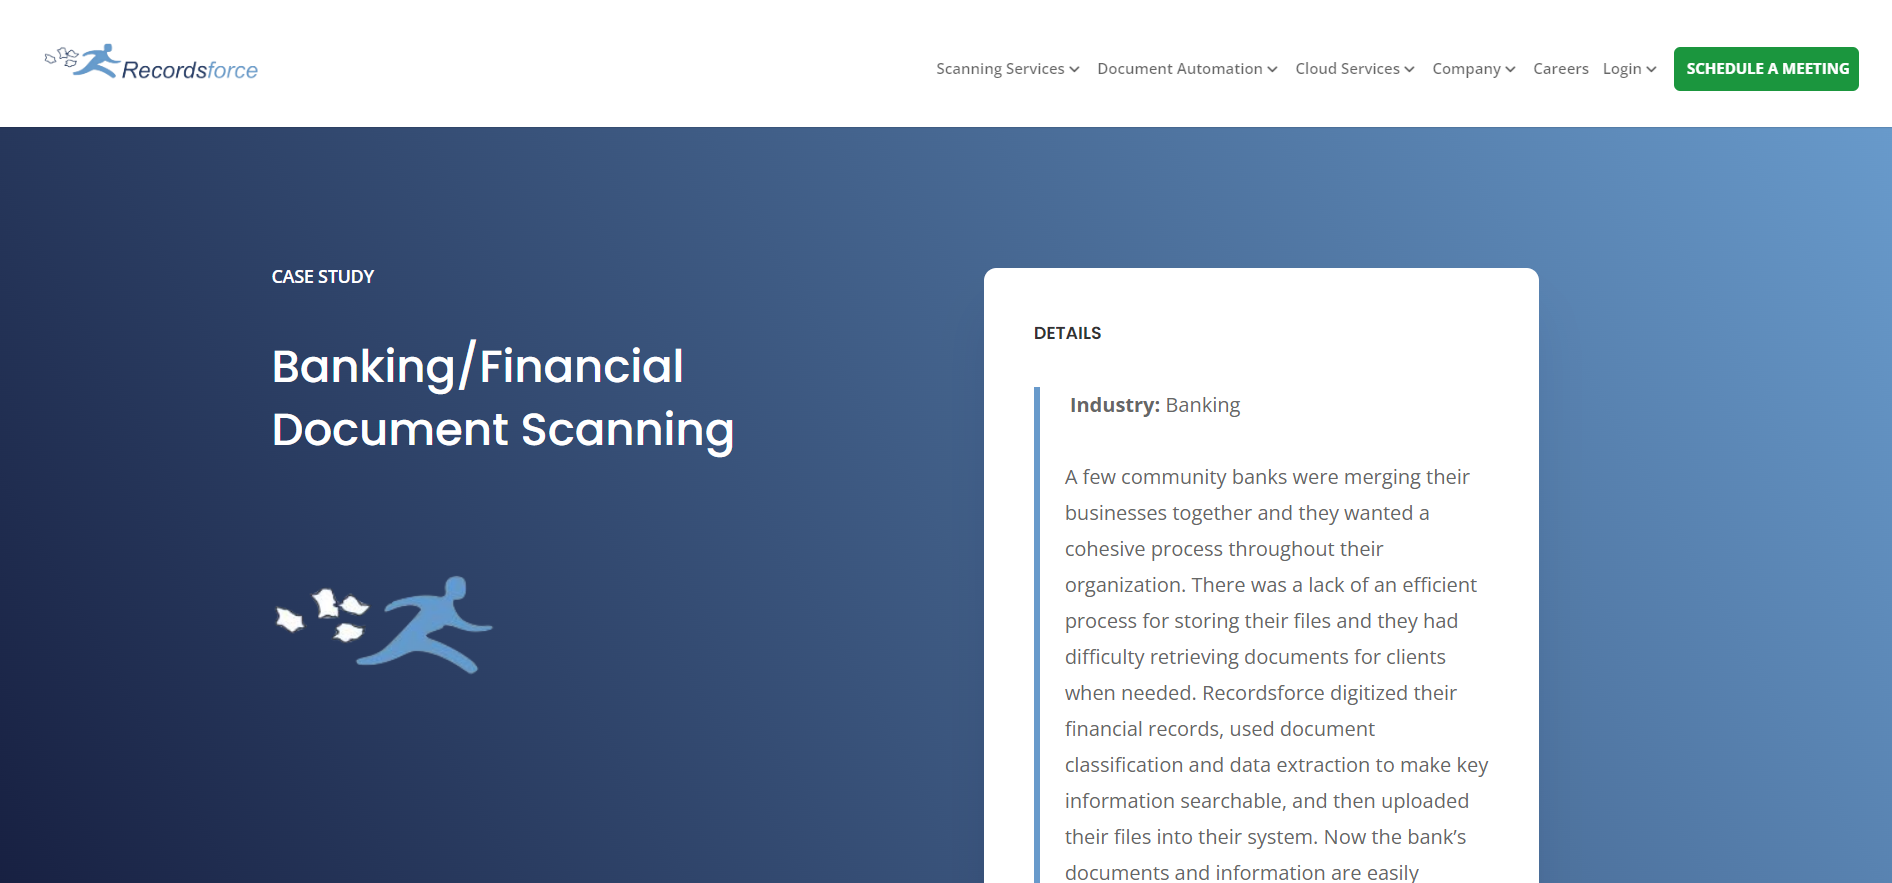 Banking Financial Document Scanning Case Study